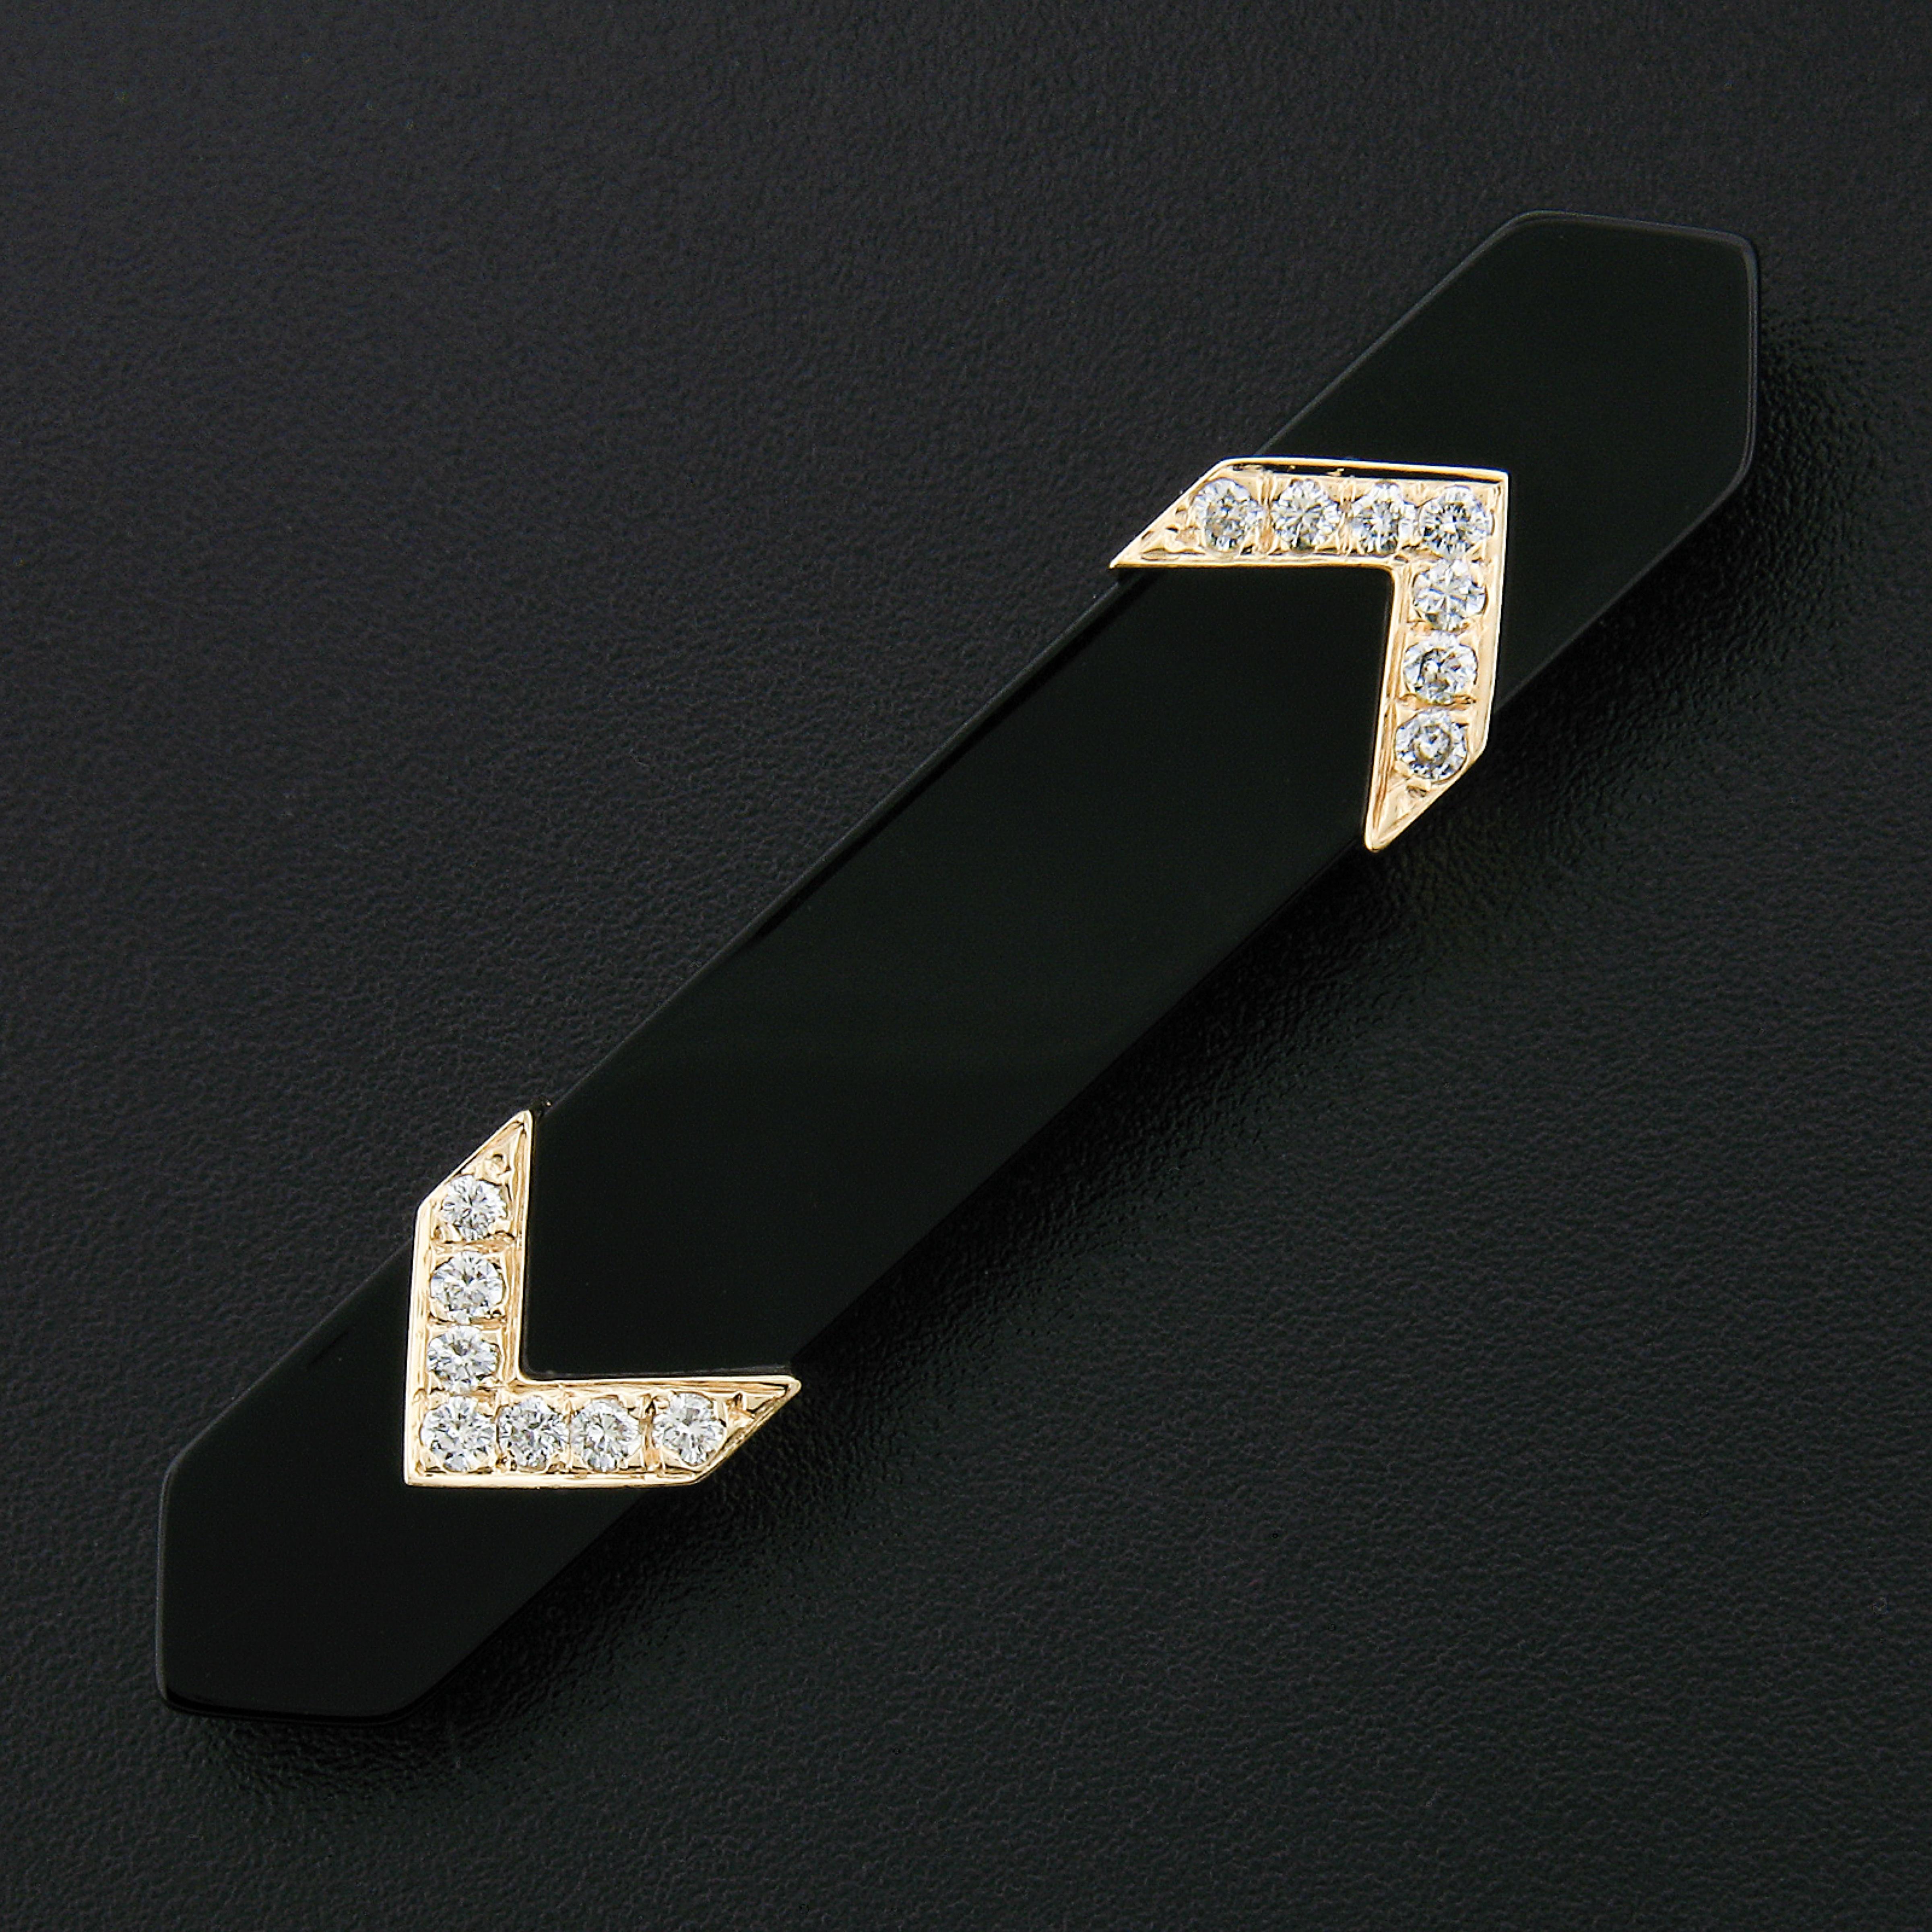 Here were have a vintage bar pin/brooch that is constructed from a highly polished, genuine custom cut black onyx stone. The black onyx stone is accented with very fine quality diamonds that are pave set on 2 14k yellow gold arrows on top of the